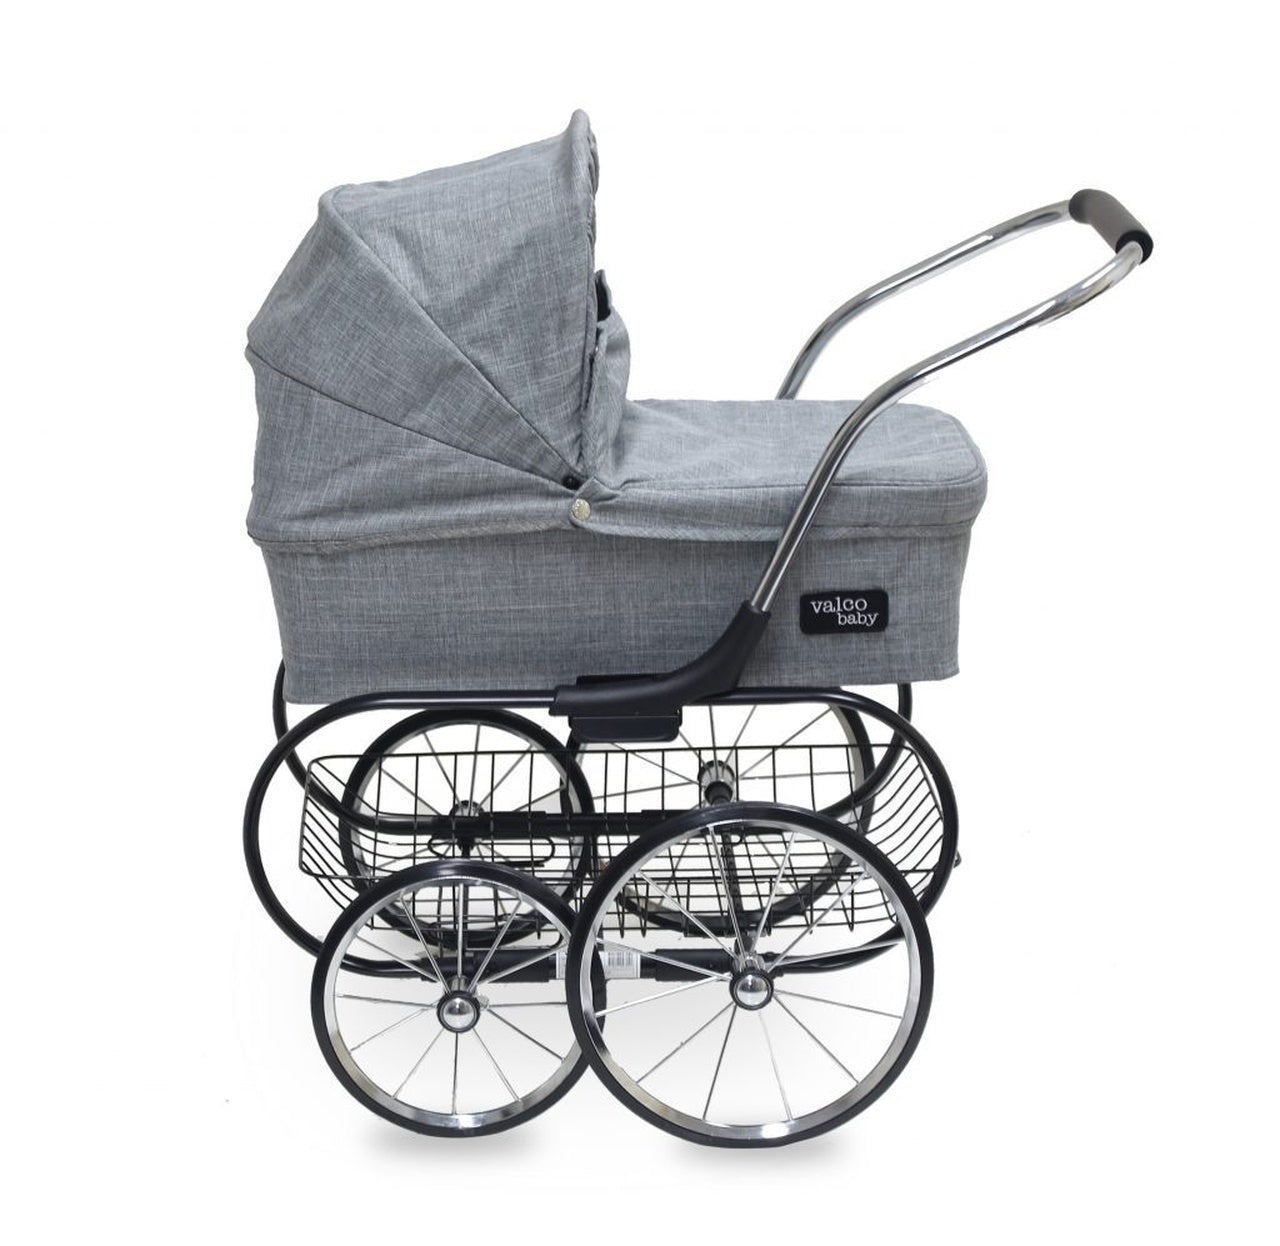 Valco Baby Royale Doll Stroller, Grey Marle, -- ANB Baby